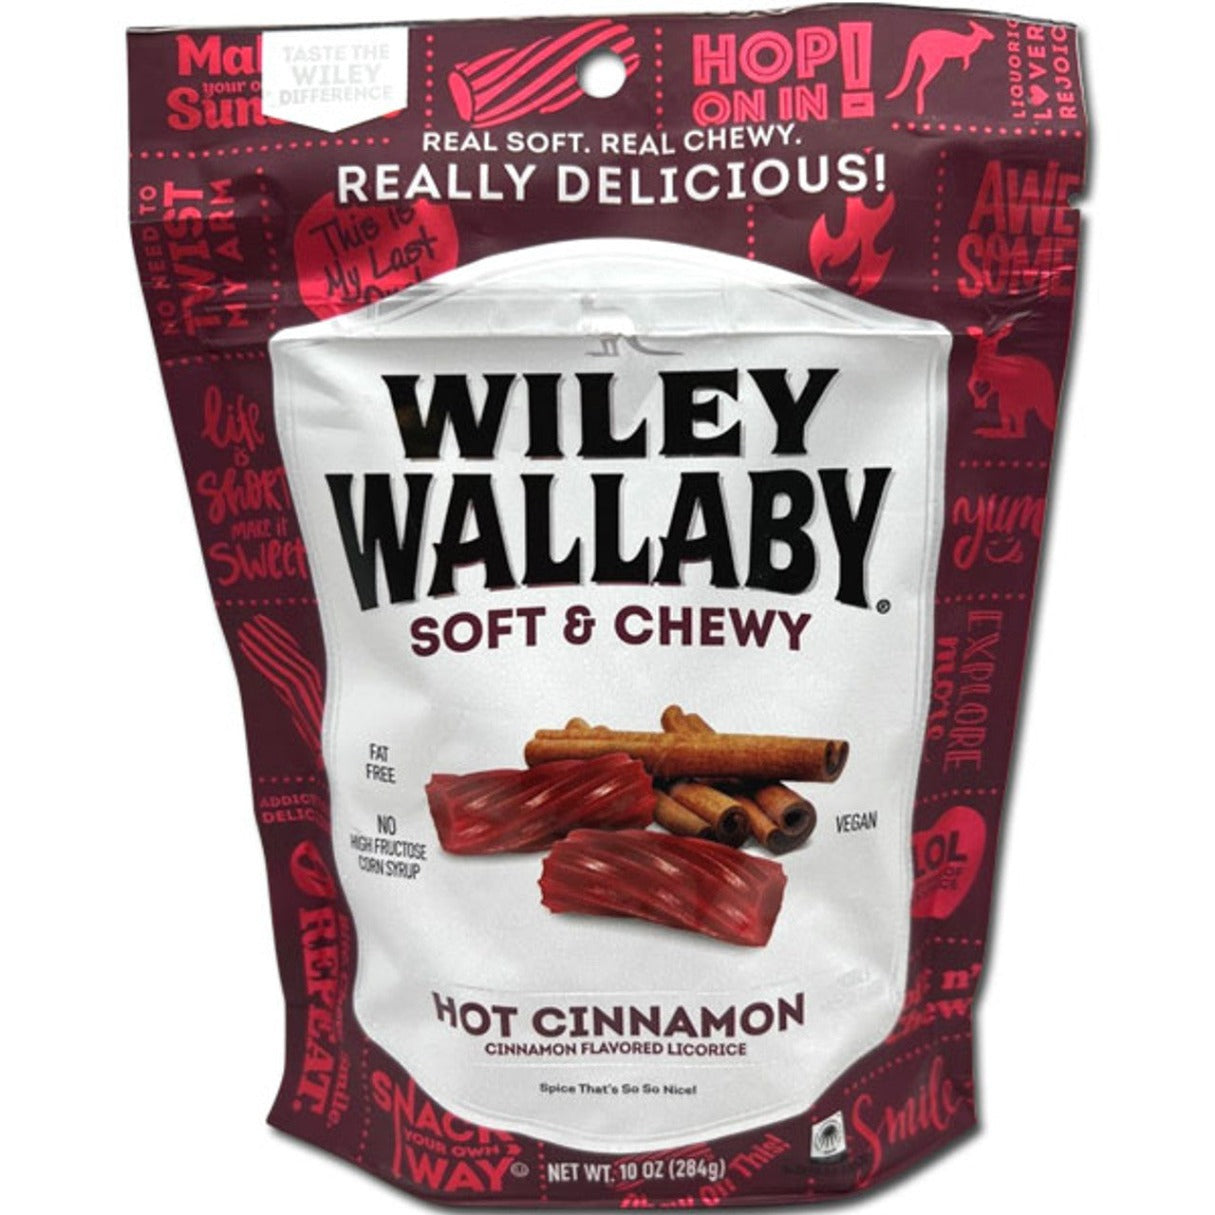 Wiley Wallaby Soft & Chewy Hot Cinnamon Licorice 10oz - 10ct